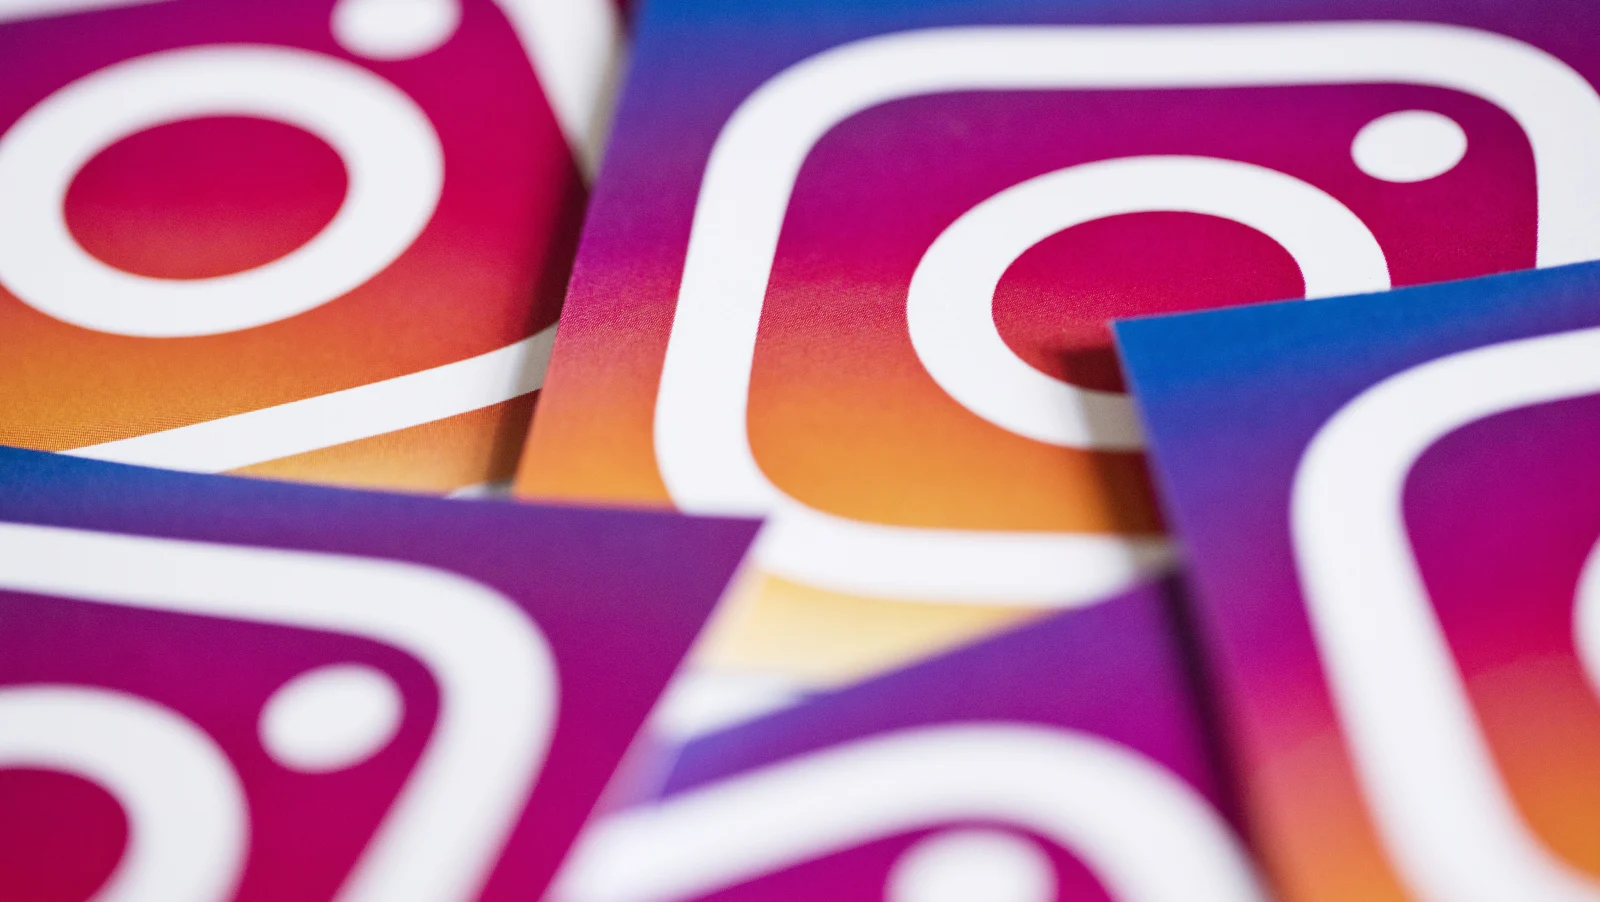 Instagram Marketing: The Ultimate Guide